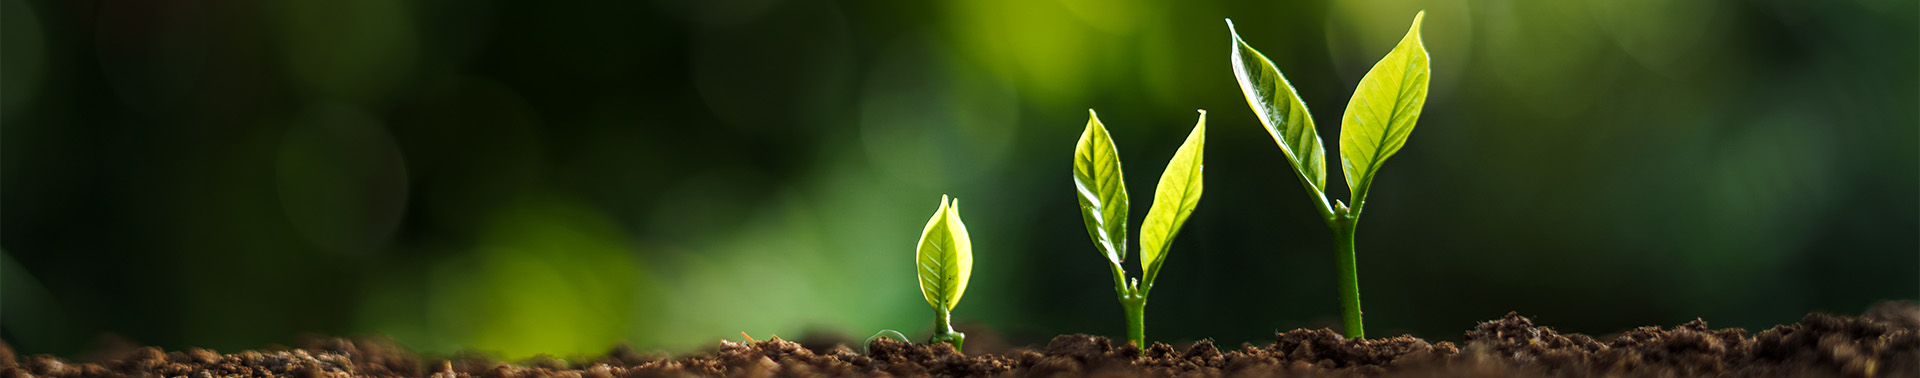 Budding plants grow larger from left to right in well-cultivated soil against a blurred background of contrasting green hues